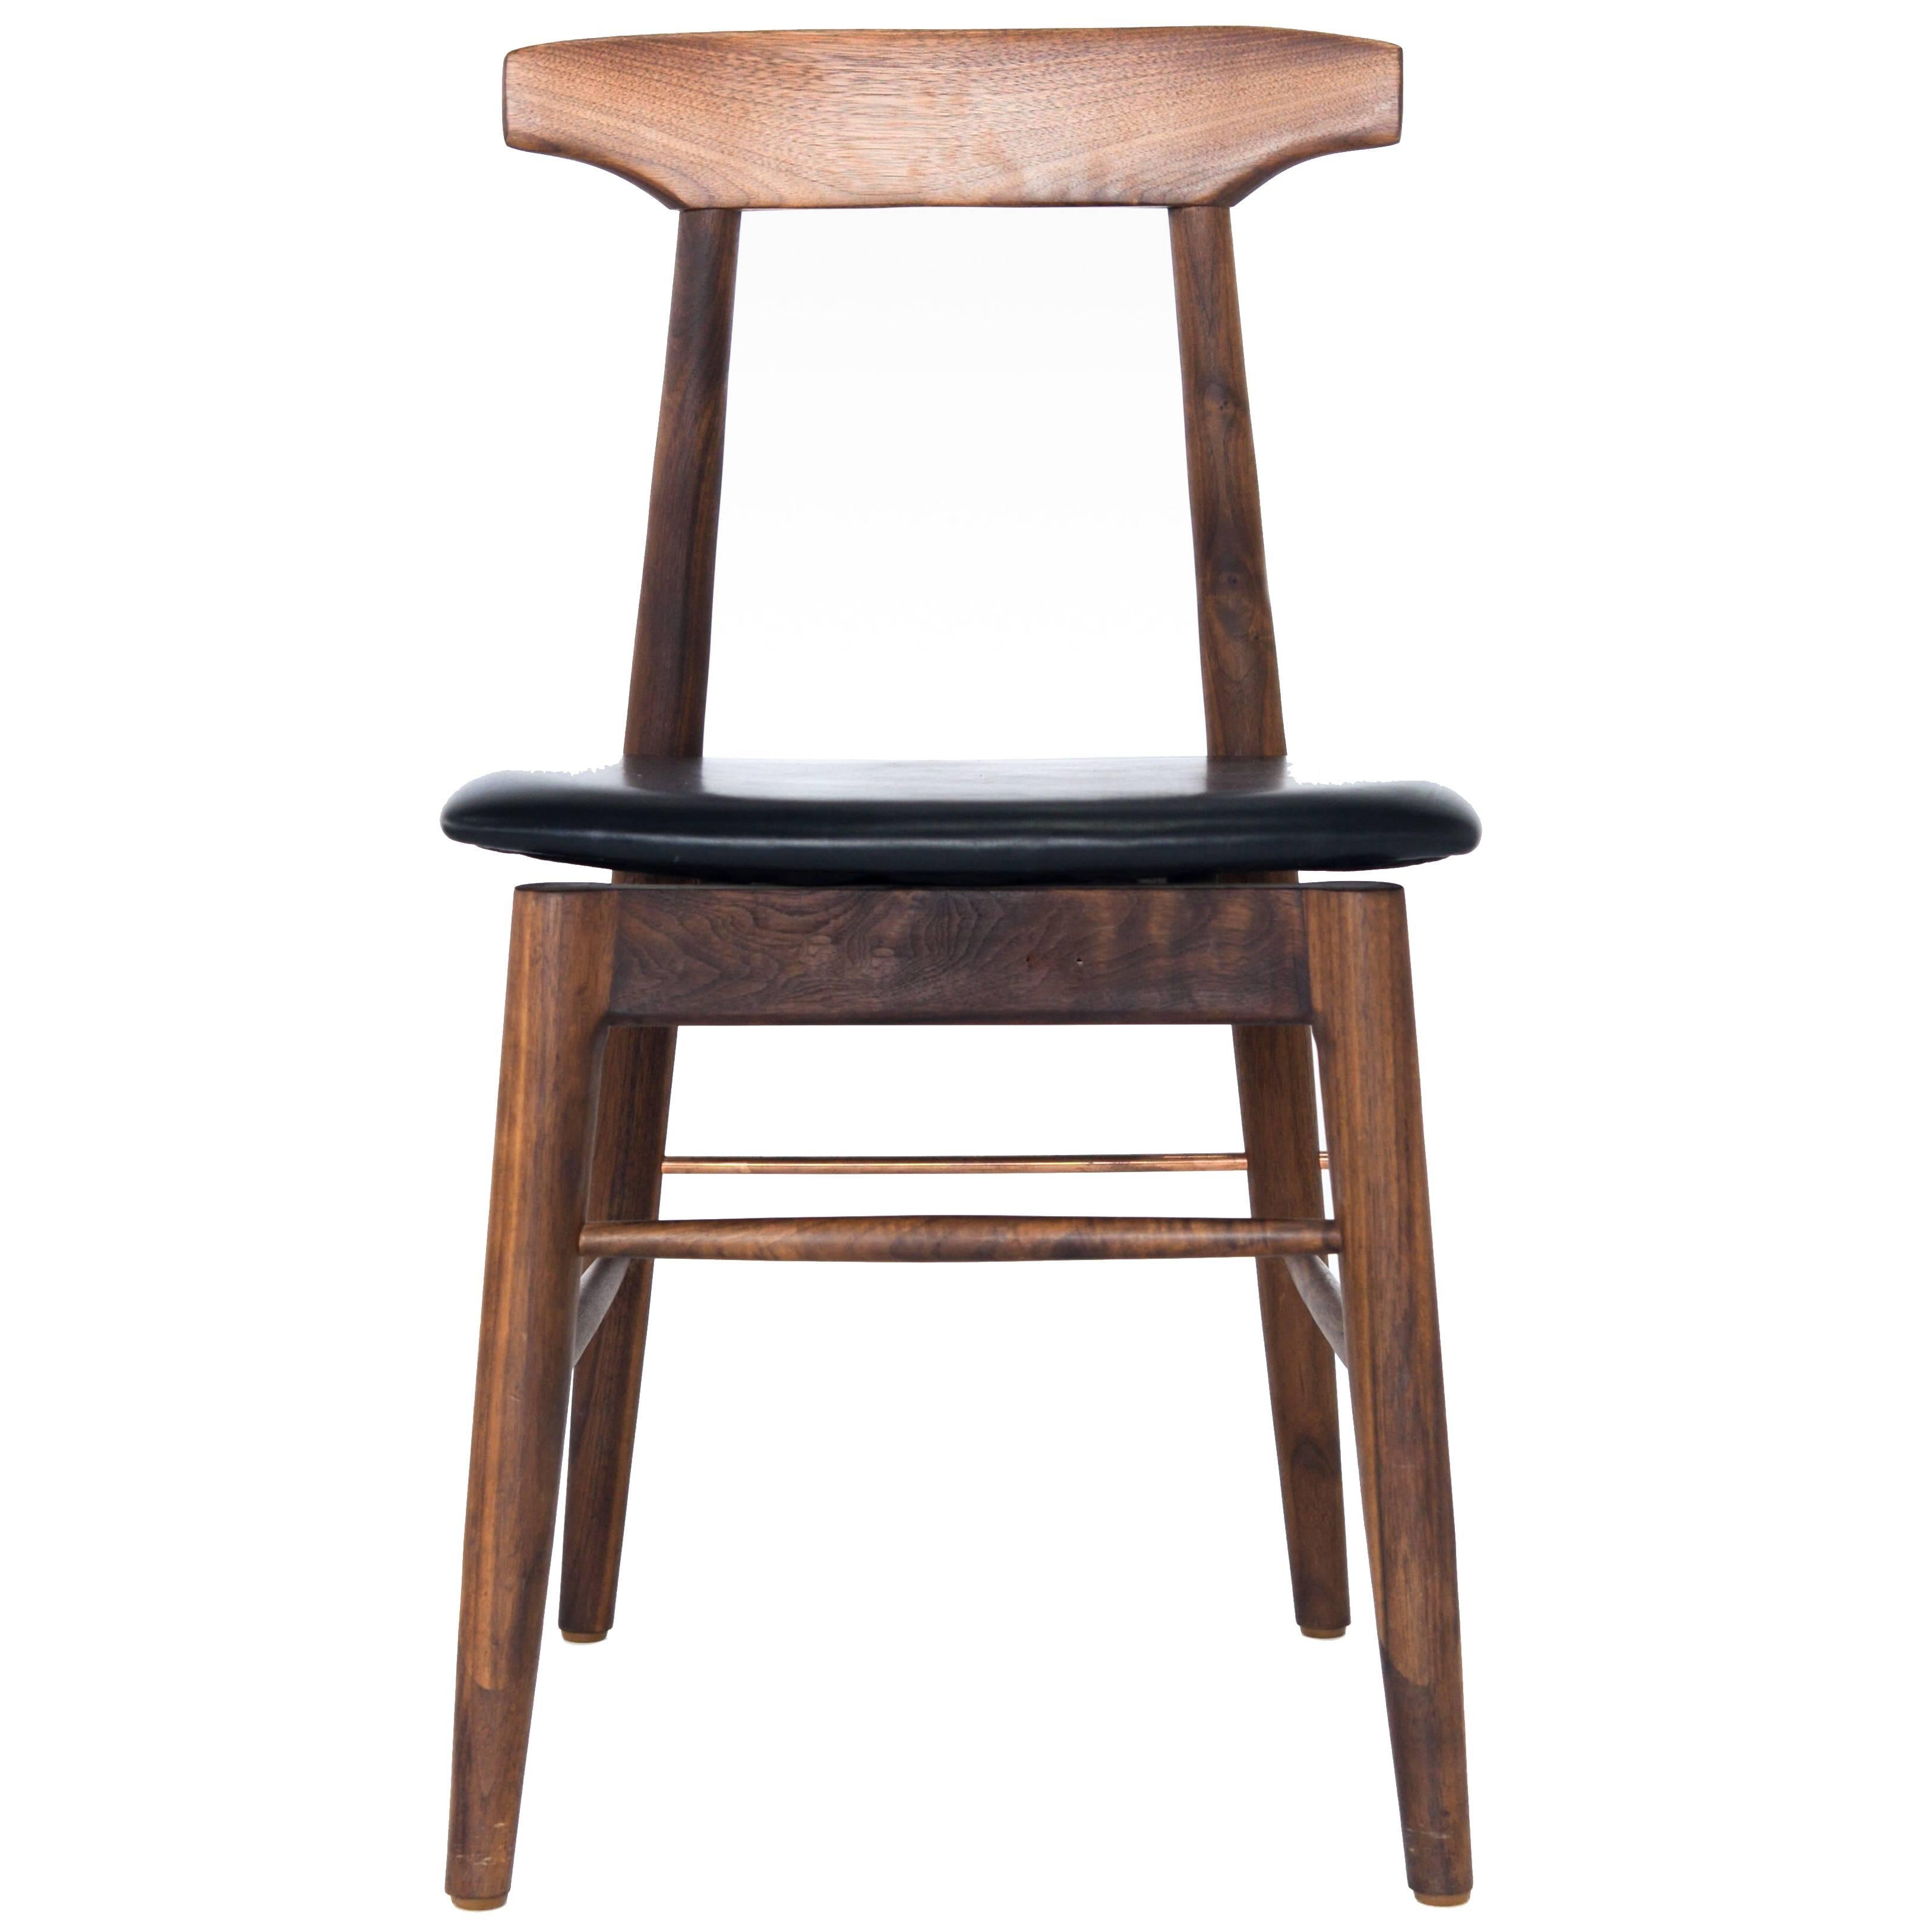 Walnut and Black Leather Sable Dining Chair